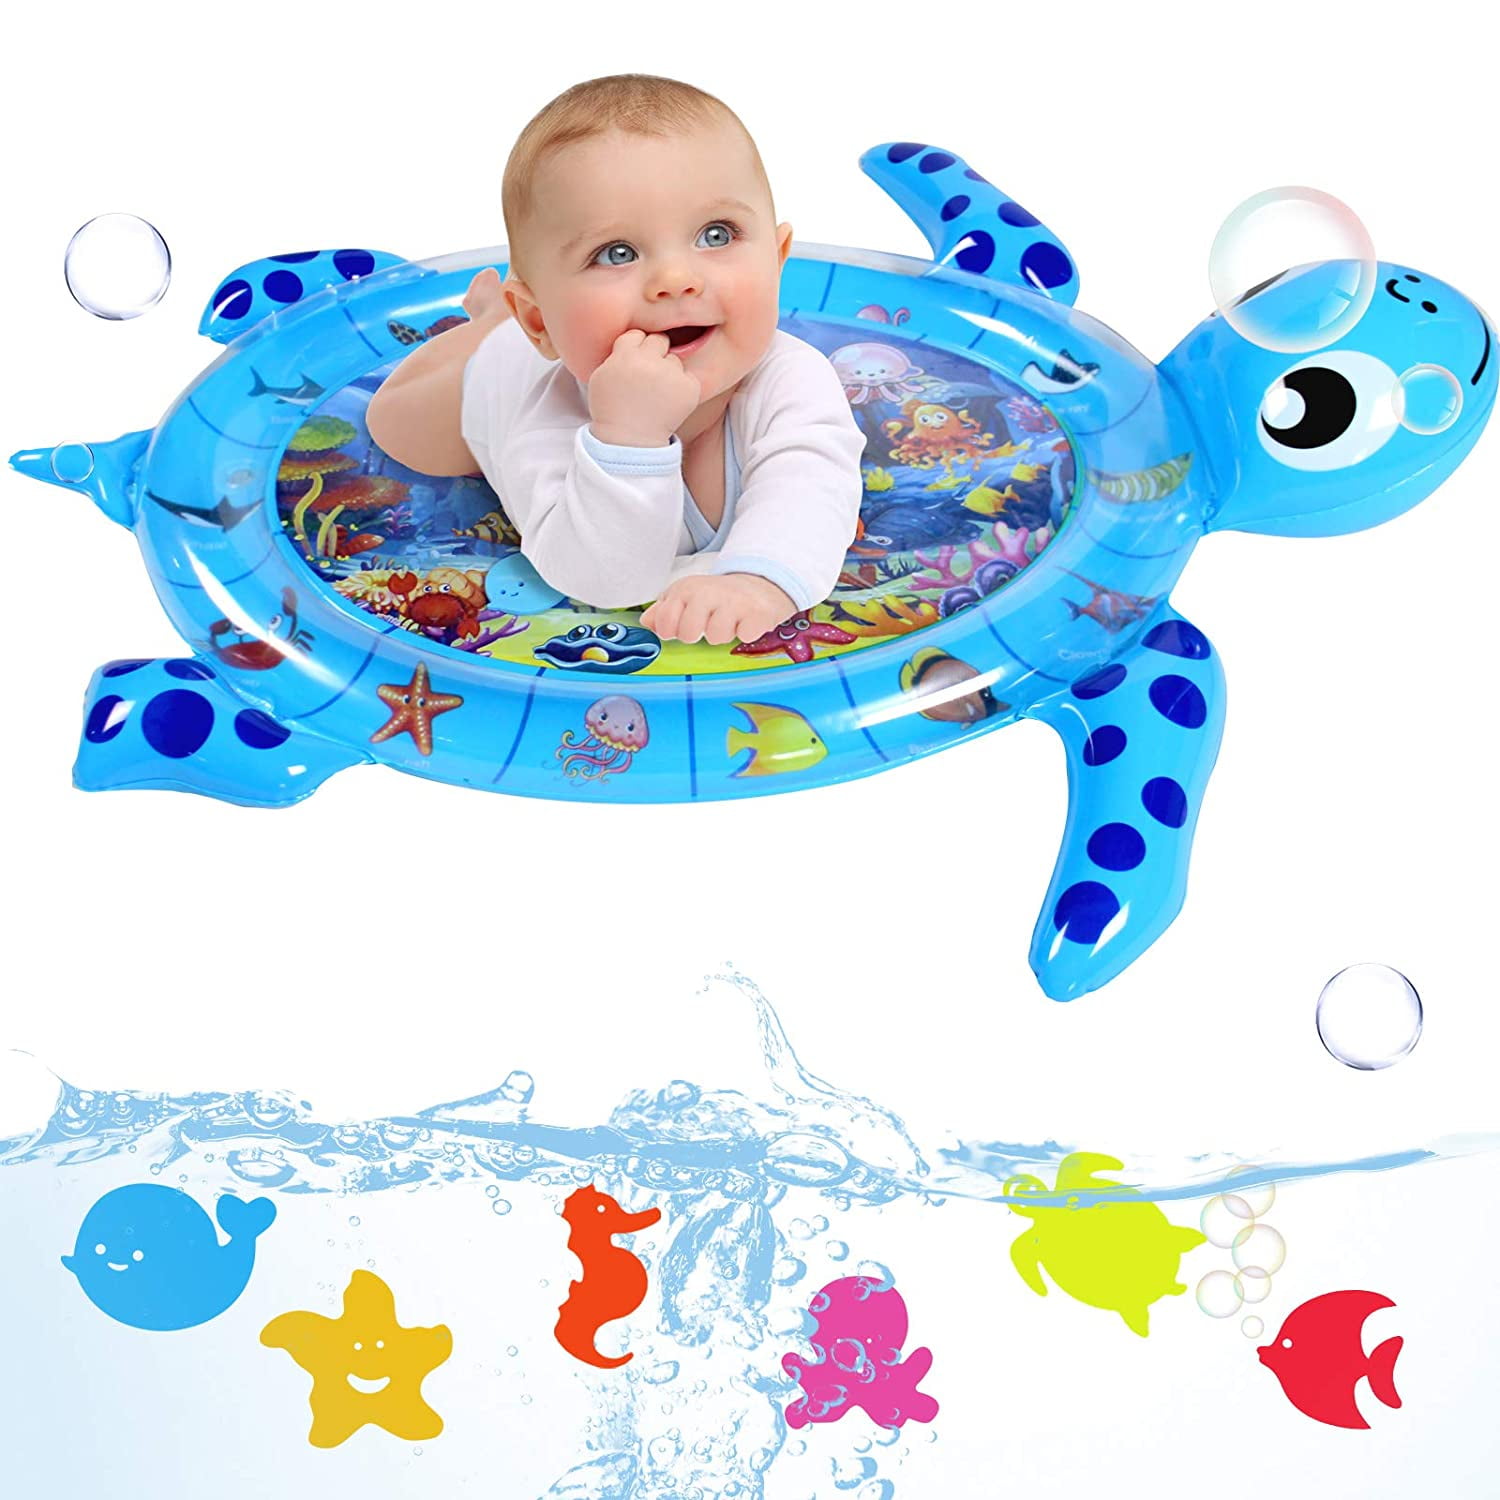 Safe Baby Mirror Developmental Learning Toy For Infant Crib Floor Fun Activity L 